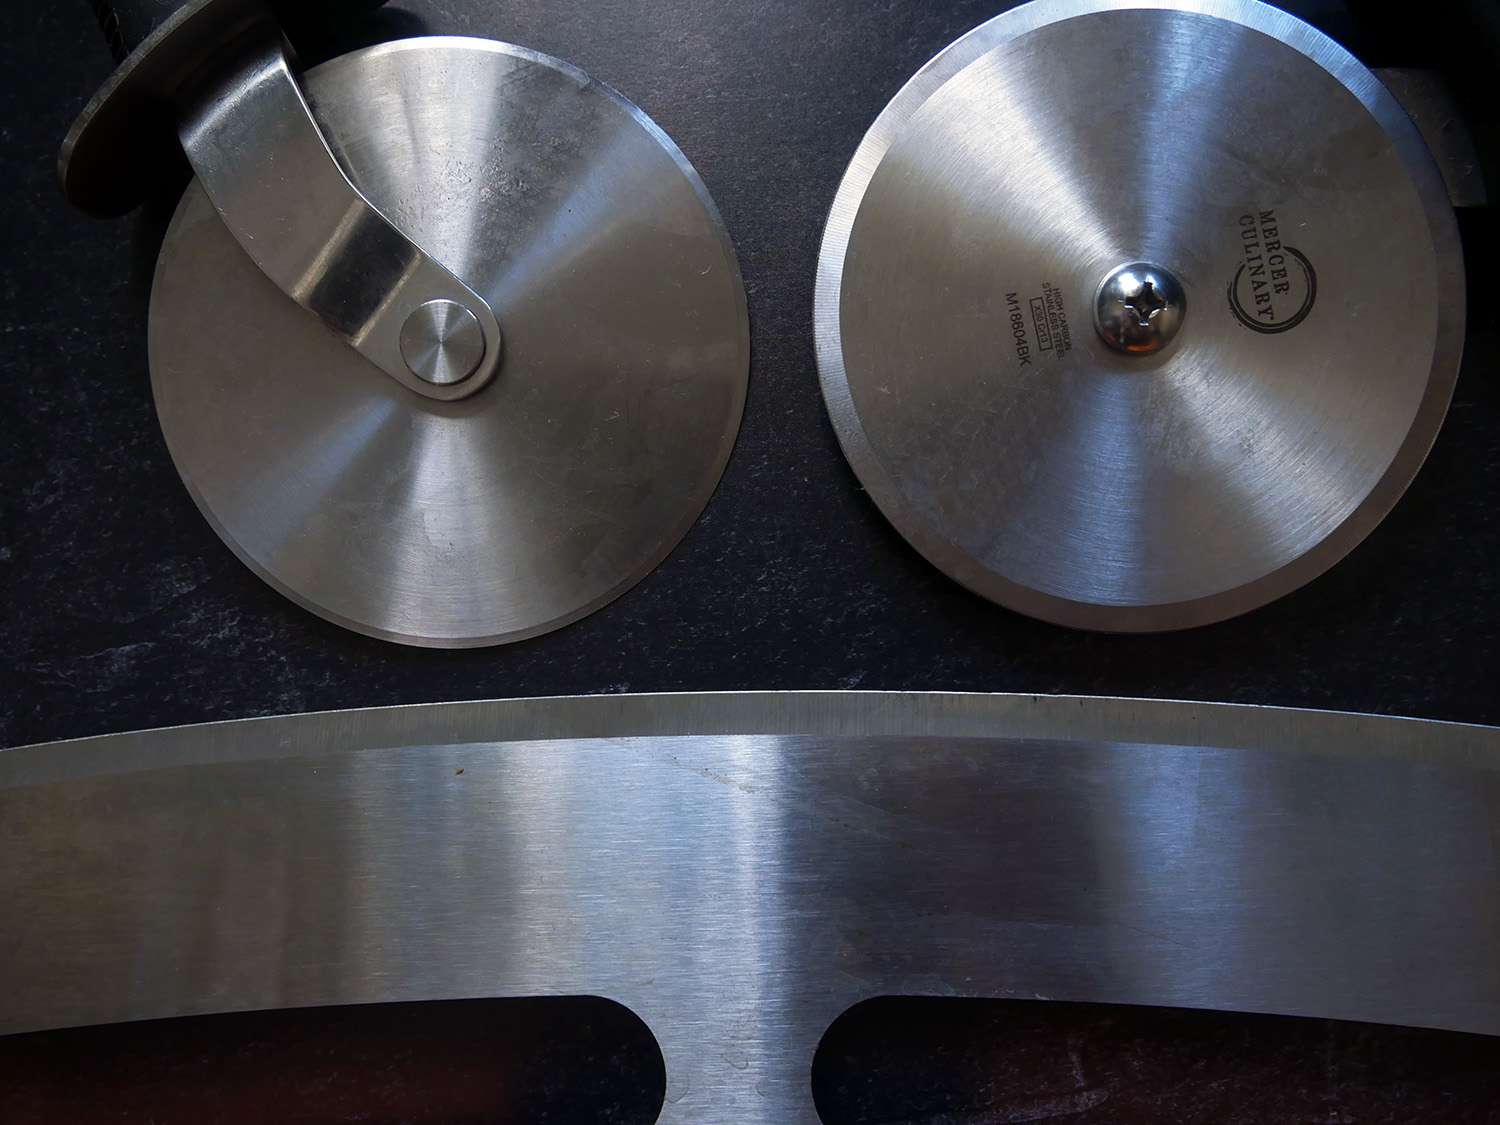 a closeup of the metal blades on our three winning pizza cutters